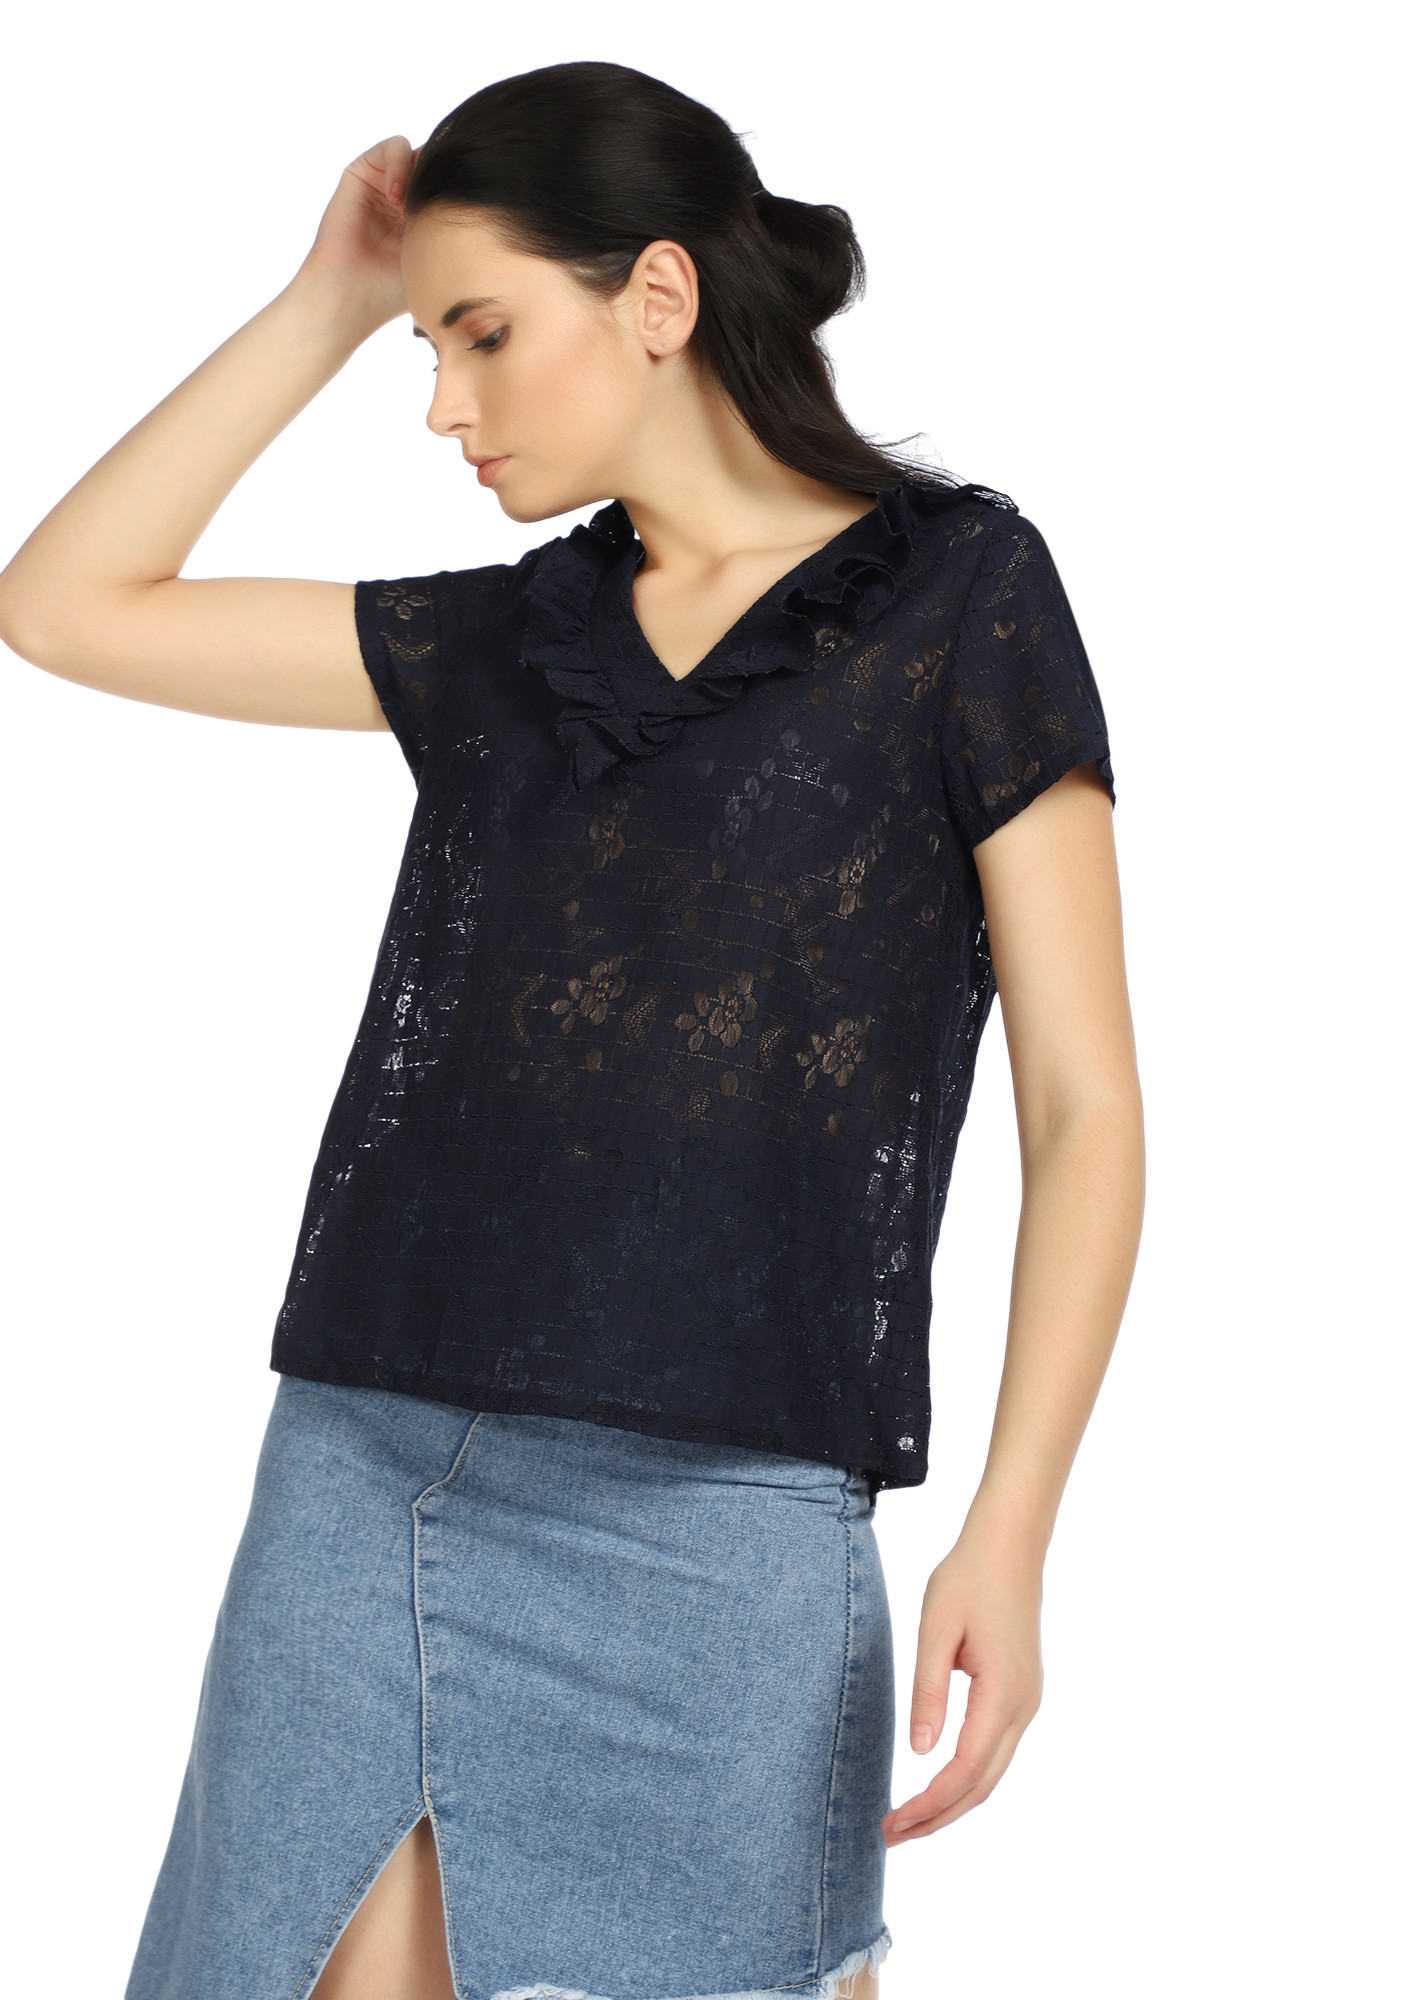 THERE IS NO STOPPING RUFFLE NAVY BLOUSE